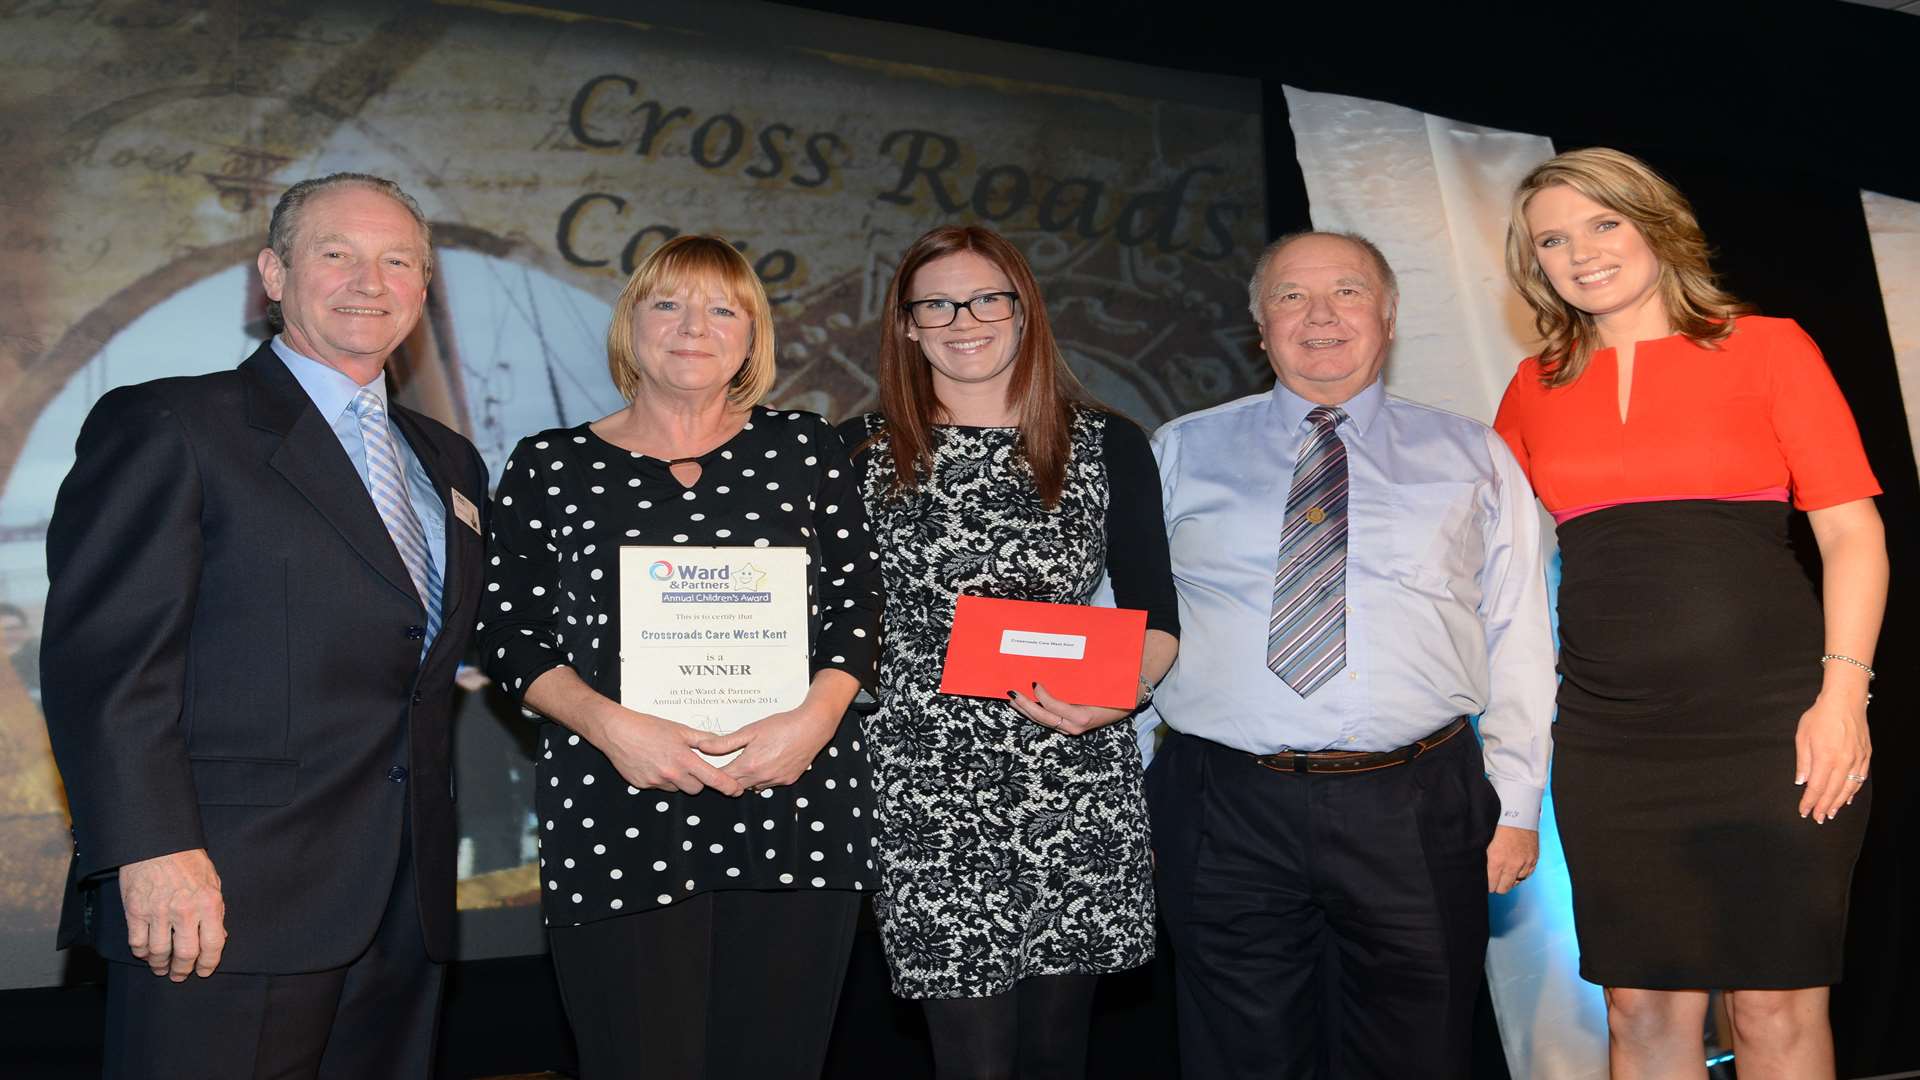 Jan Hall, Sophie Butler and Colin Trelfer collect the award for Crossroads Care